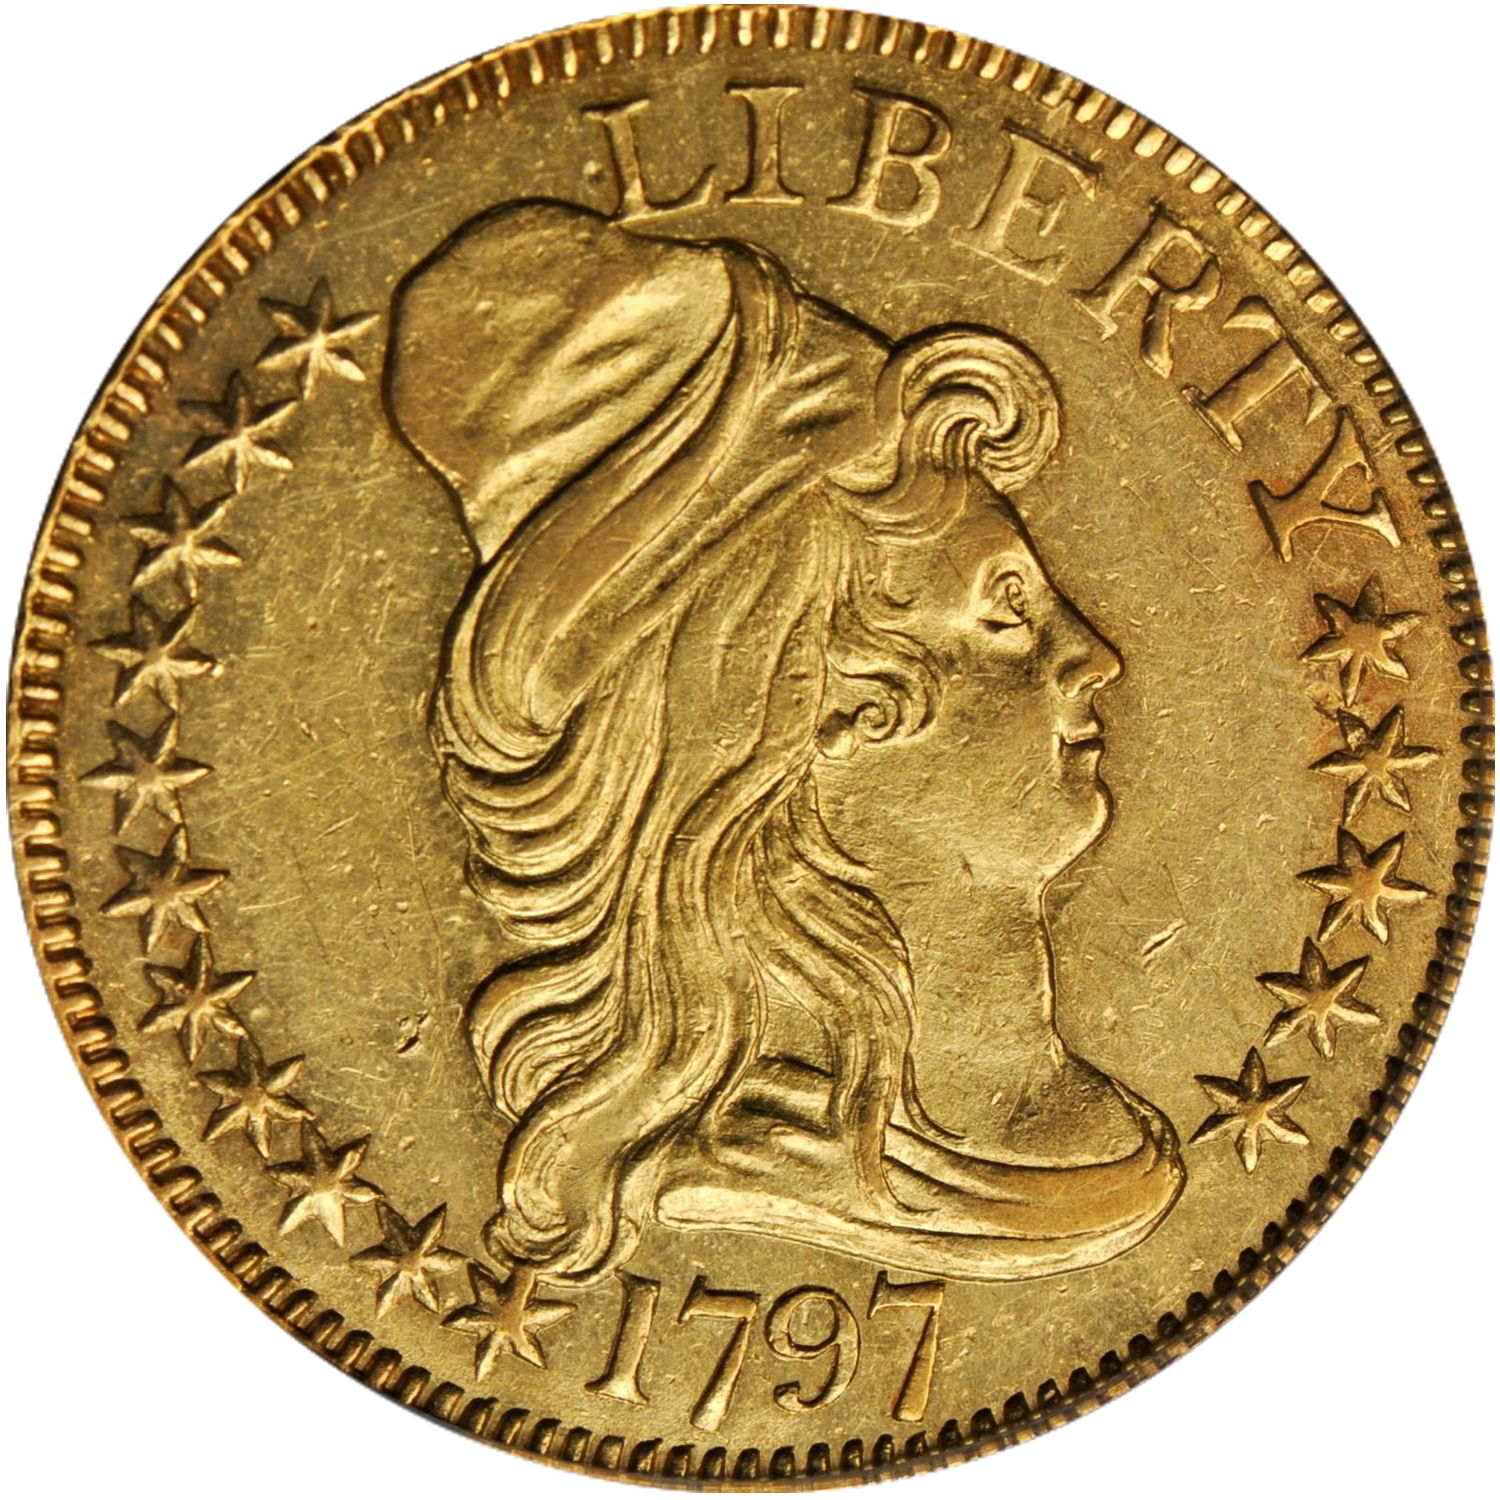 1797 16 stars capped bust right half eagle